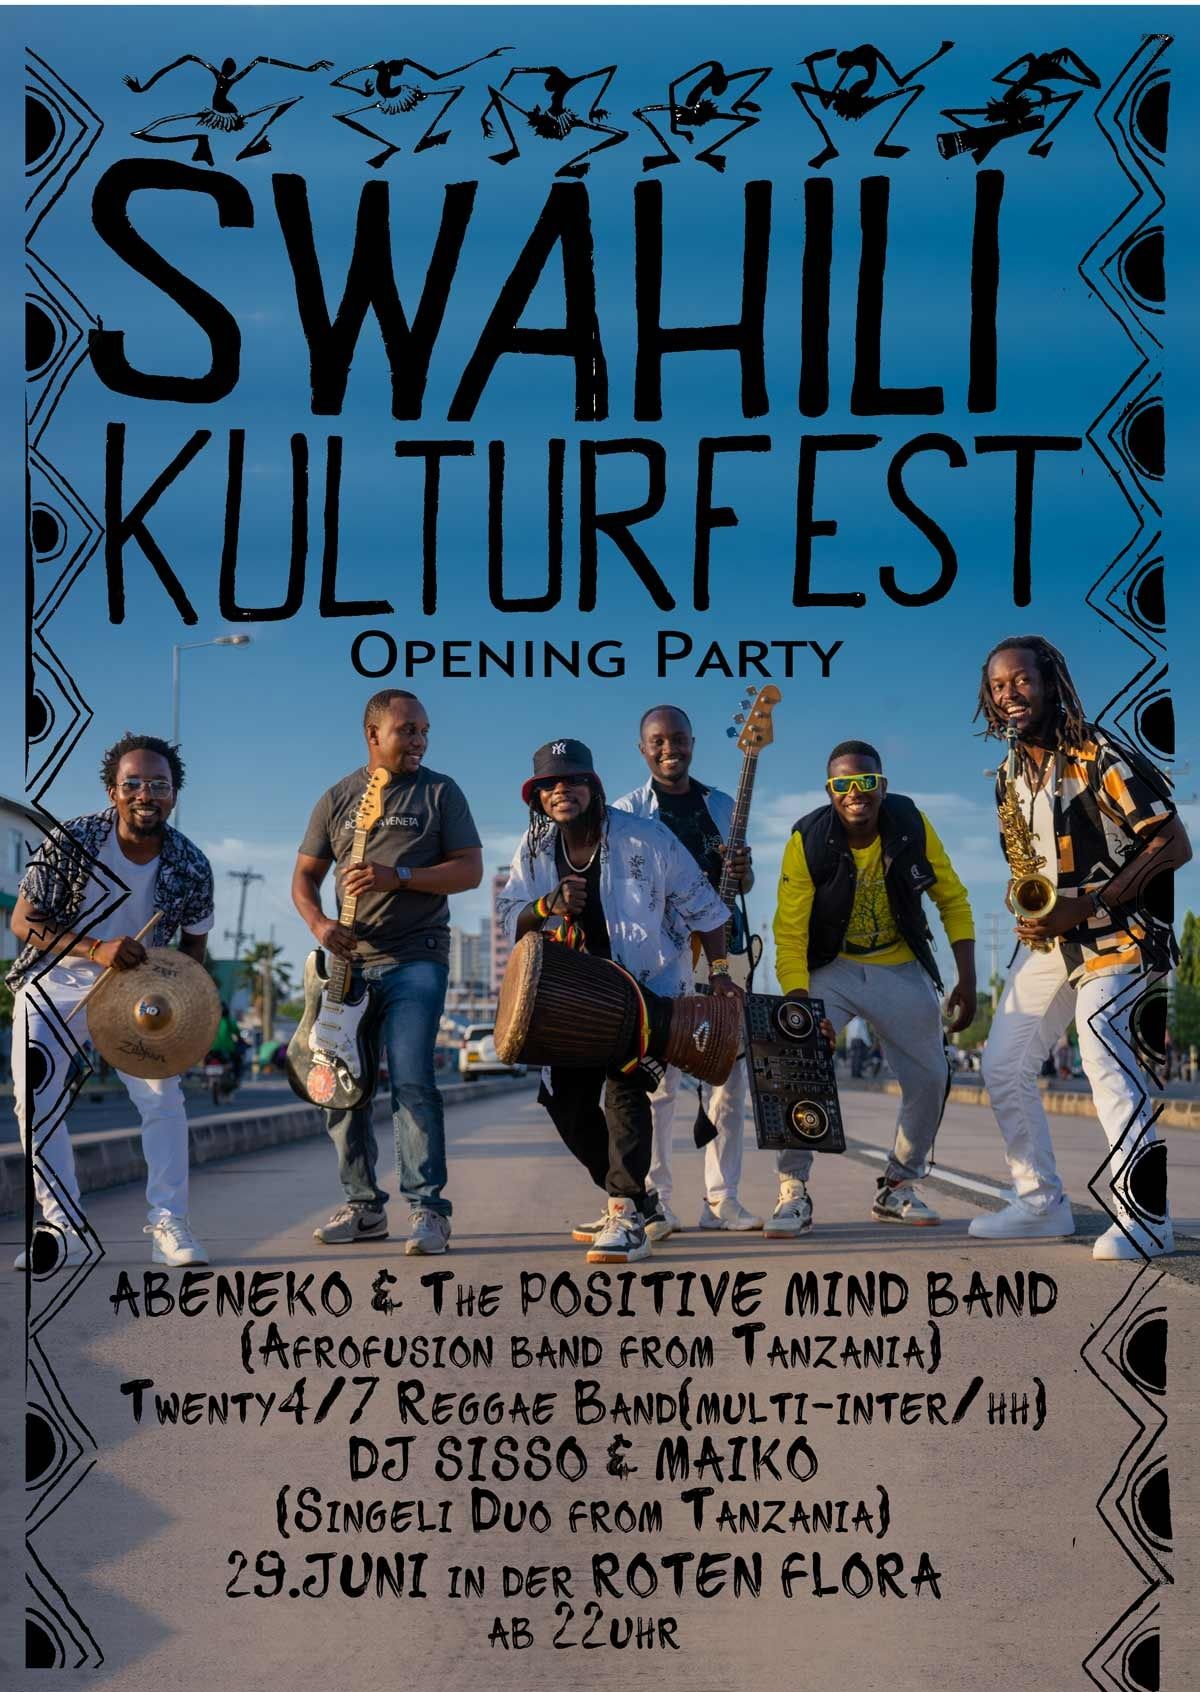 Swahili Cultural Festival Opening Party!